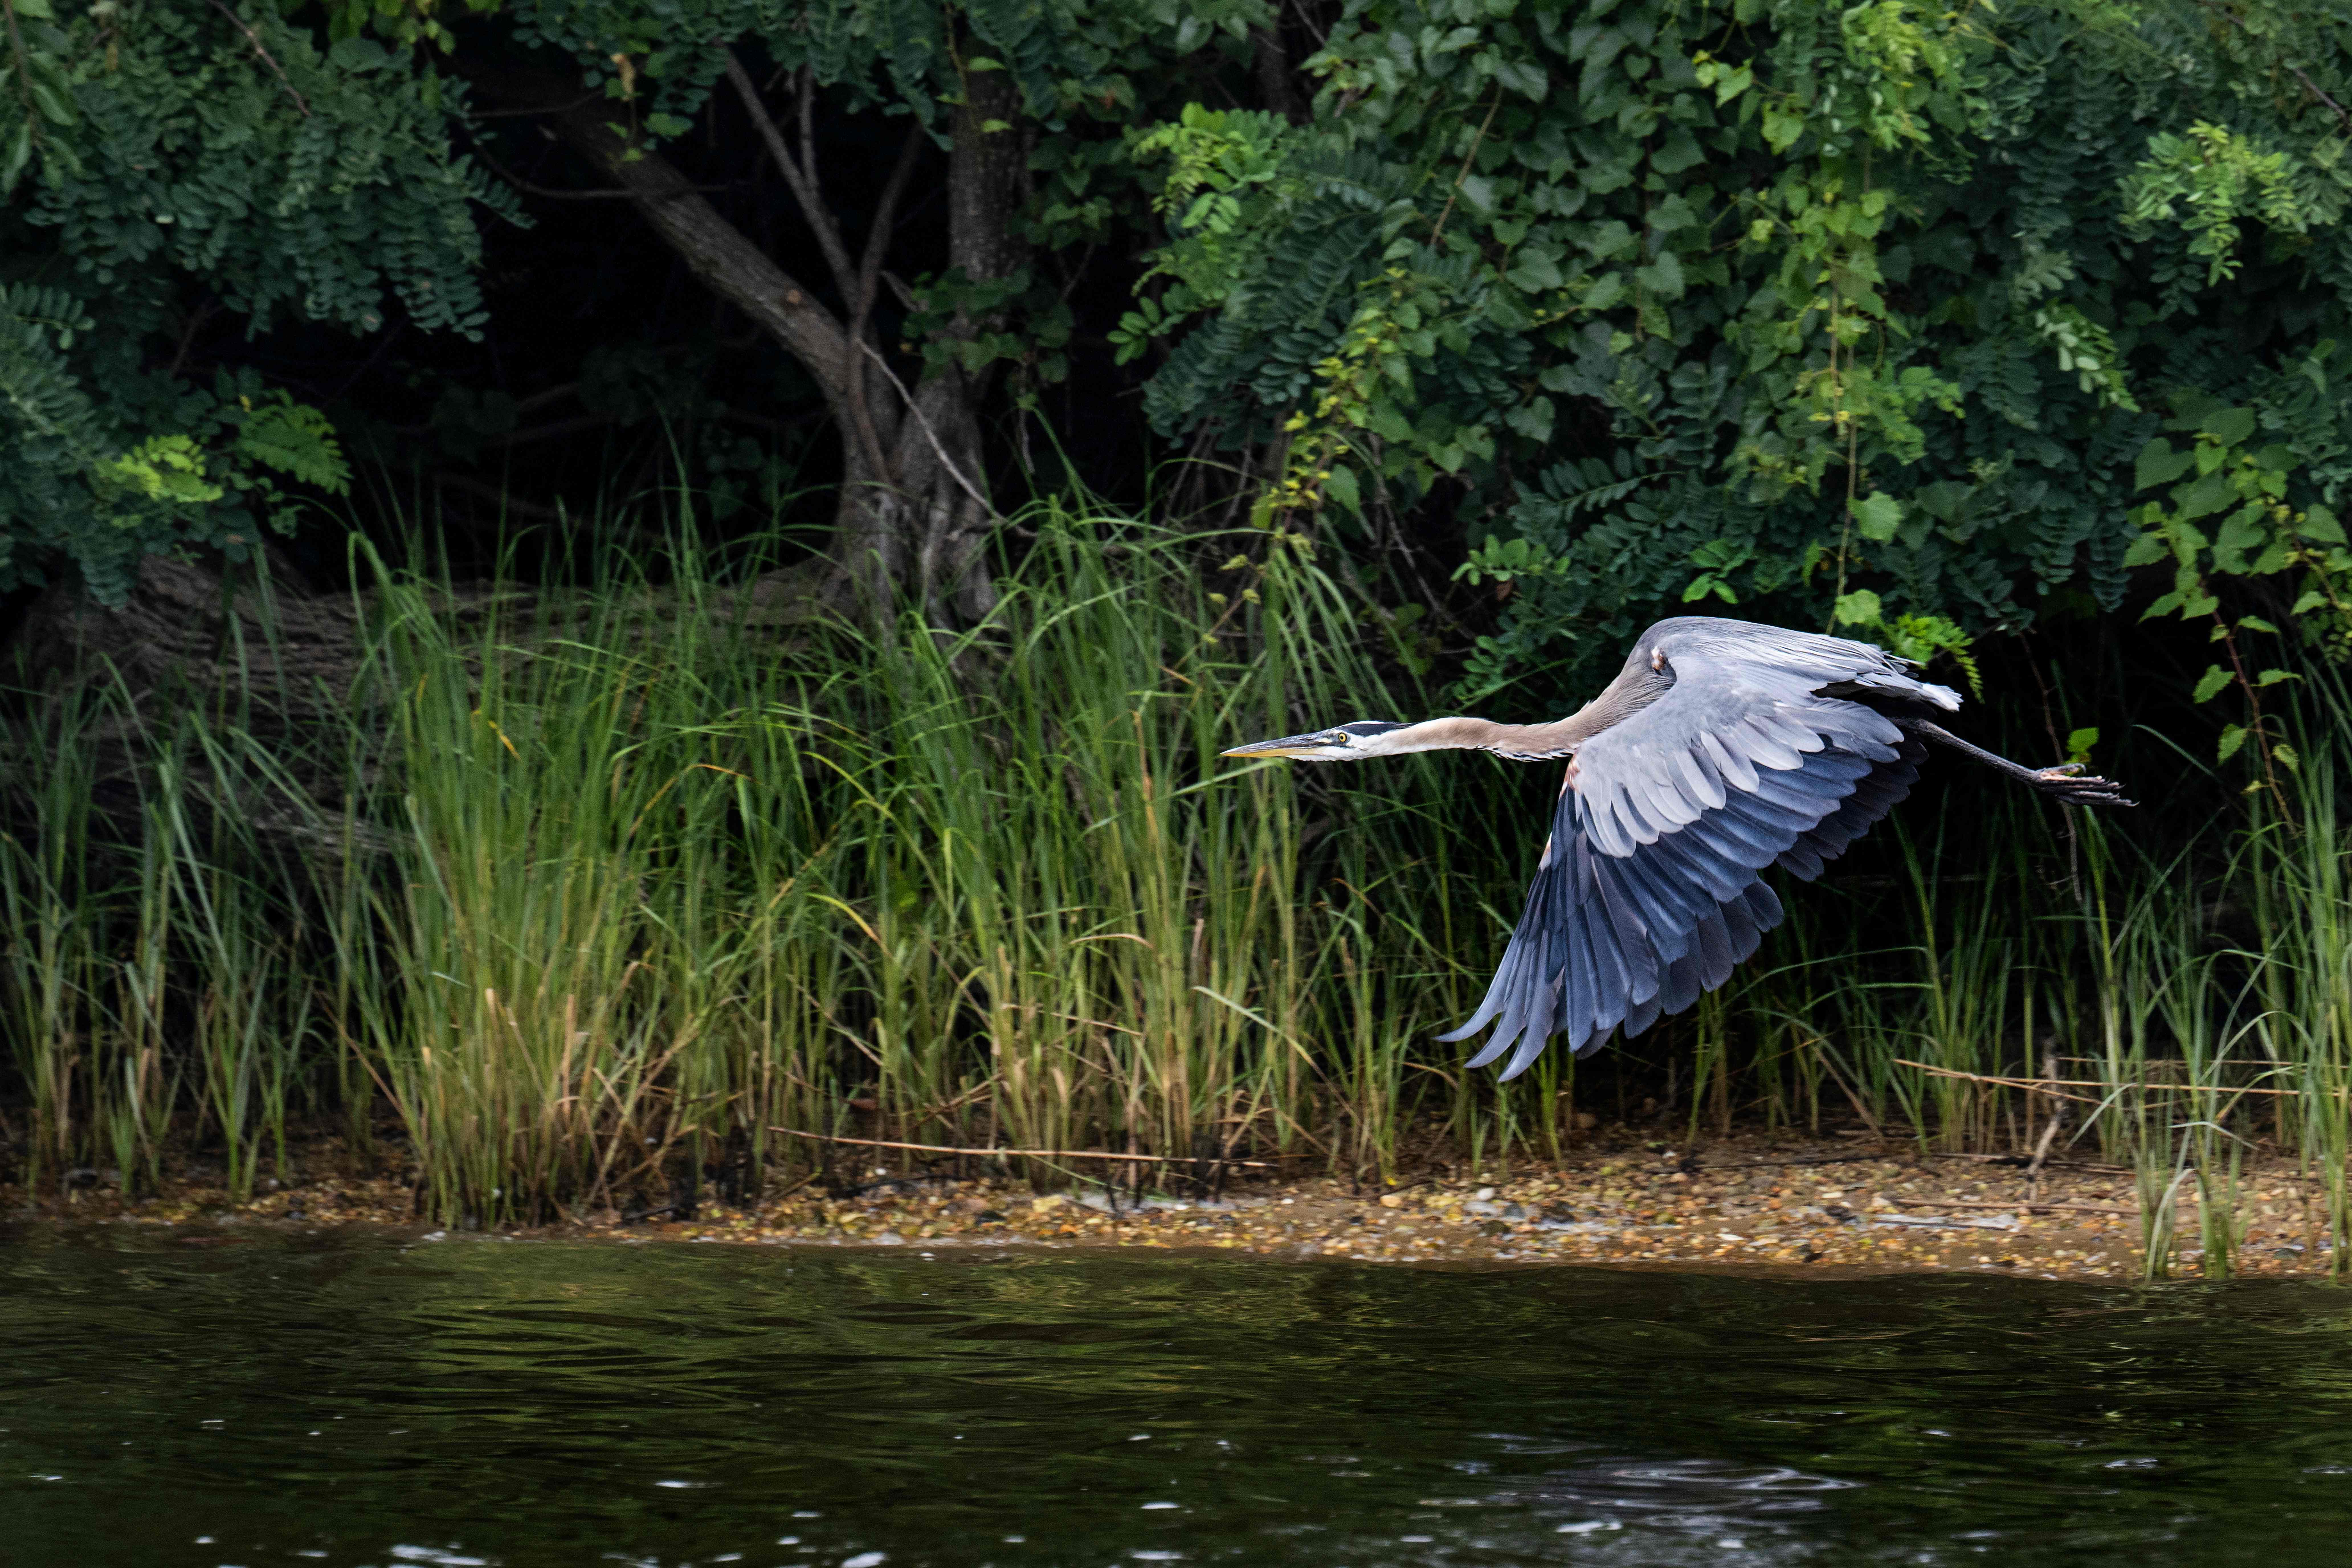 A Blue Heron takes off in July on the Corsica River, a tributary of the Chesapeake Bay, near Centreville, Maryland. Credit: Jim WATSON/AFP via Getty Images.